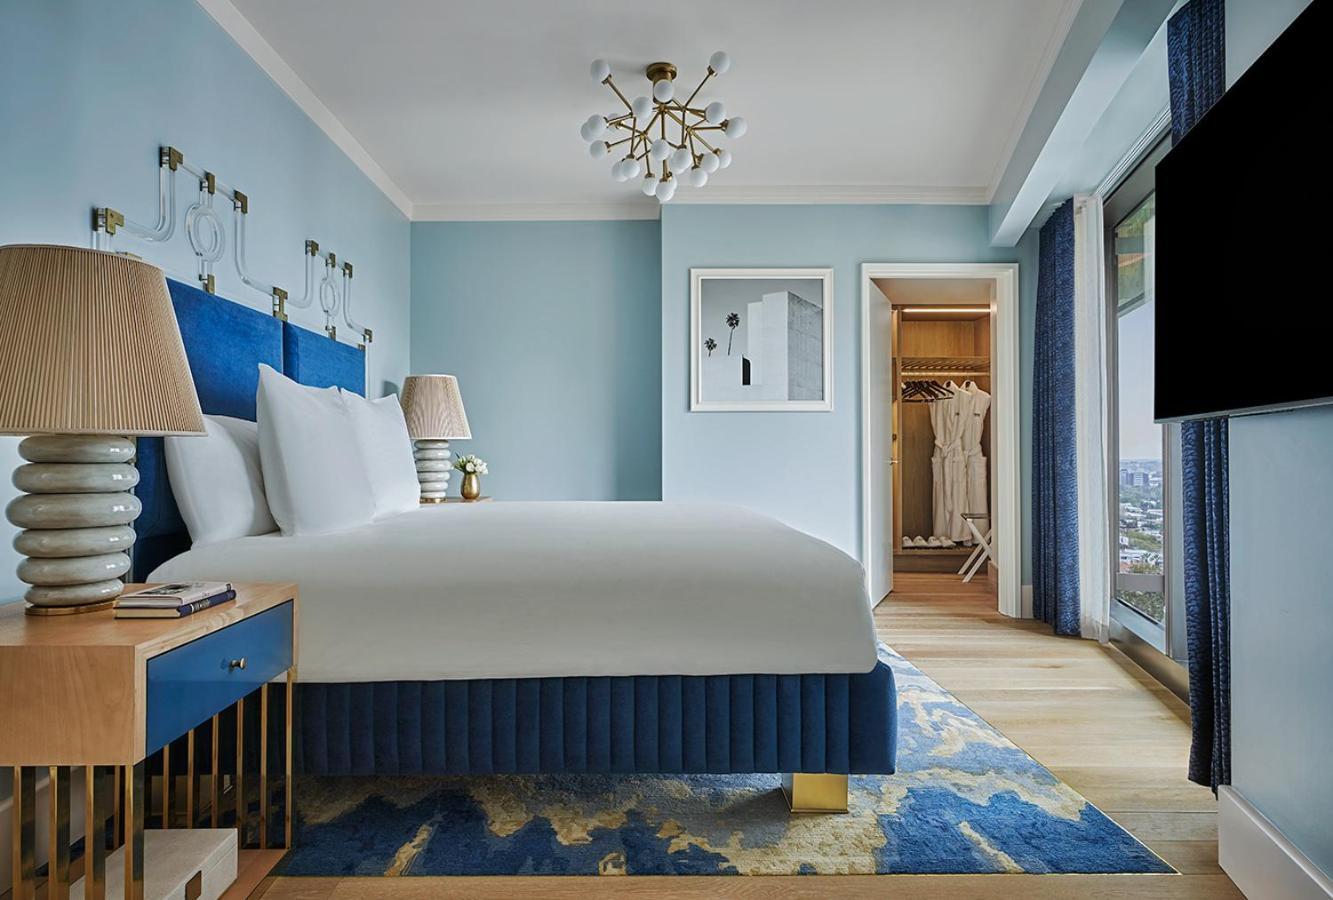 Pendry West Hollywood Hotel Los Angeles Room photo